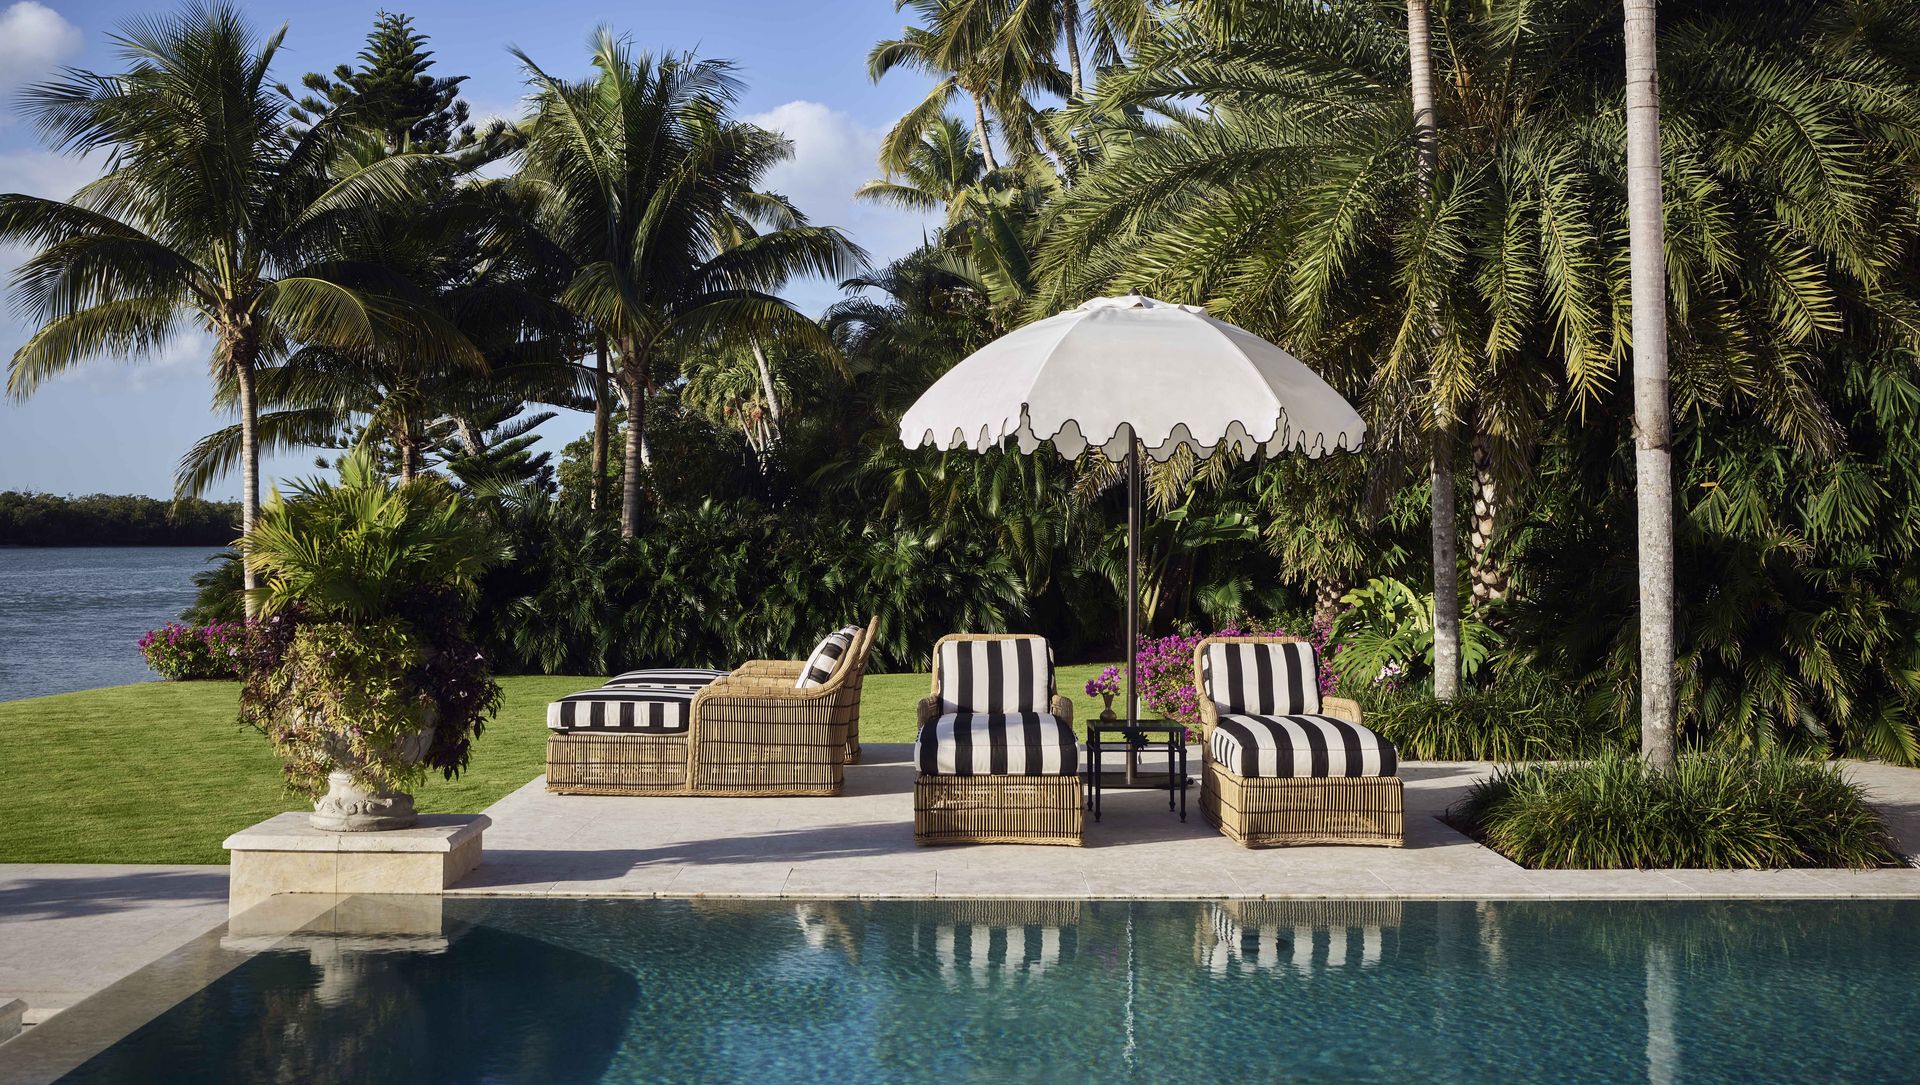 poolside view with black and white striped loungers and a white umbrella